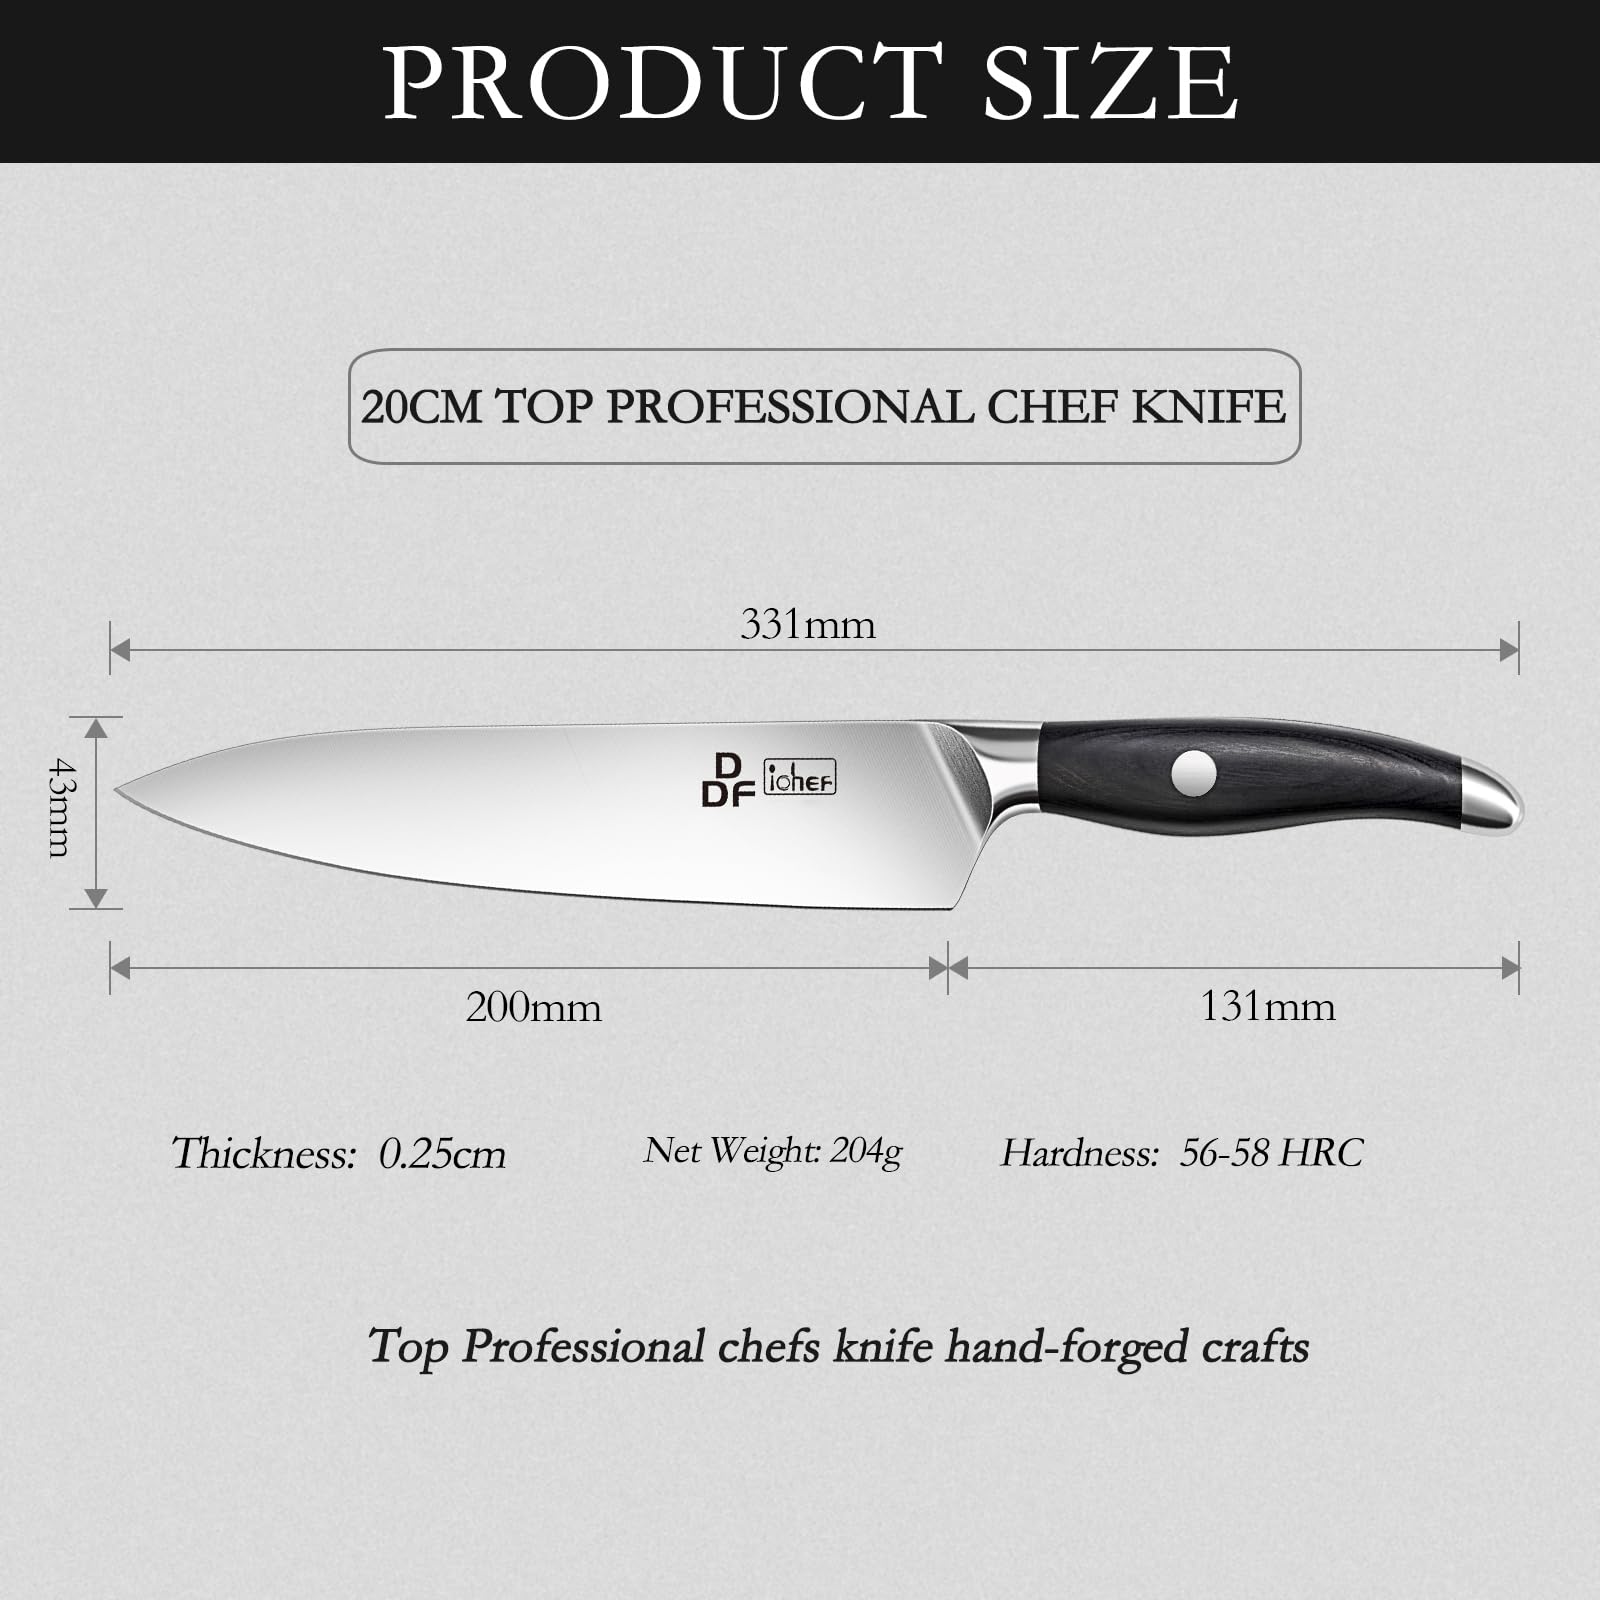 DDF iohEF Chef Knife, Kitchen Knife 8 Inch High Carbon Stainless Steel Chef's Knives Professional Sharp Chopping Knife with Ergonomic Handle for Meat Cutting Cooking